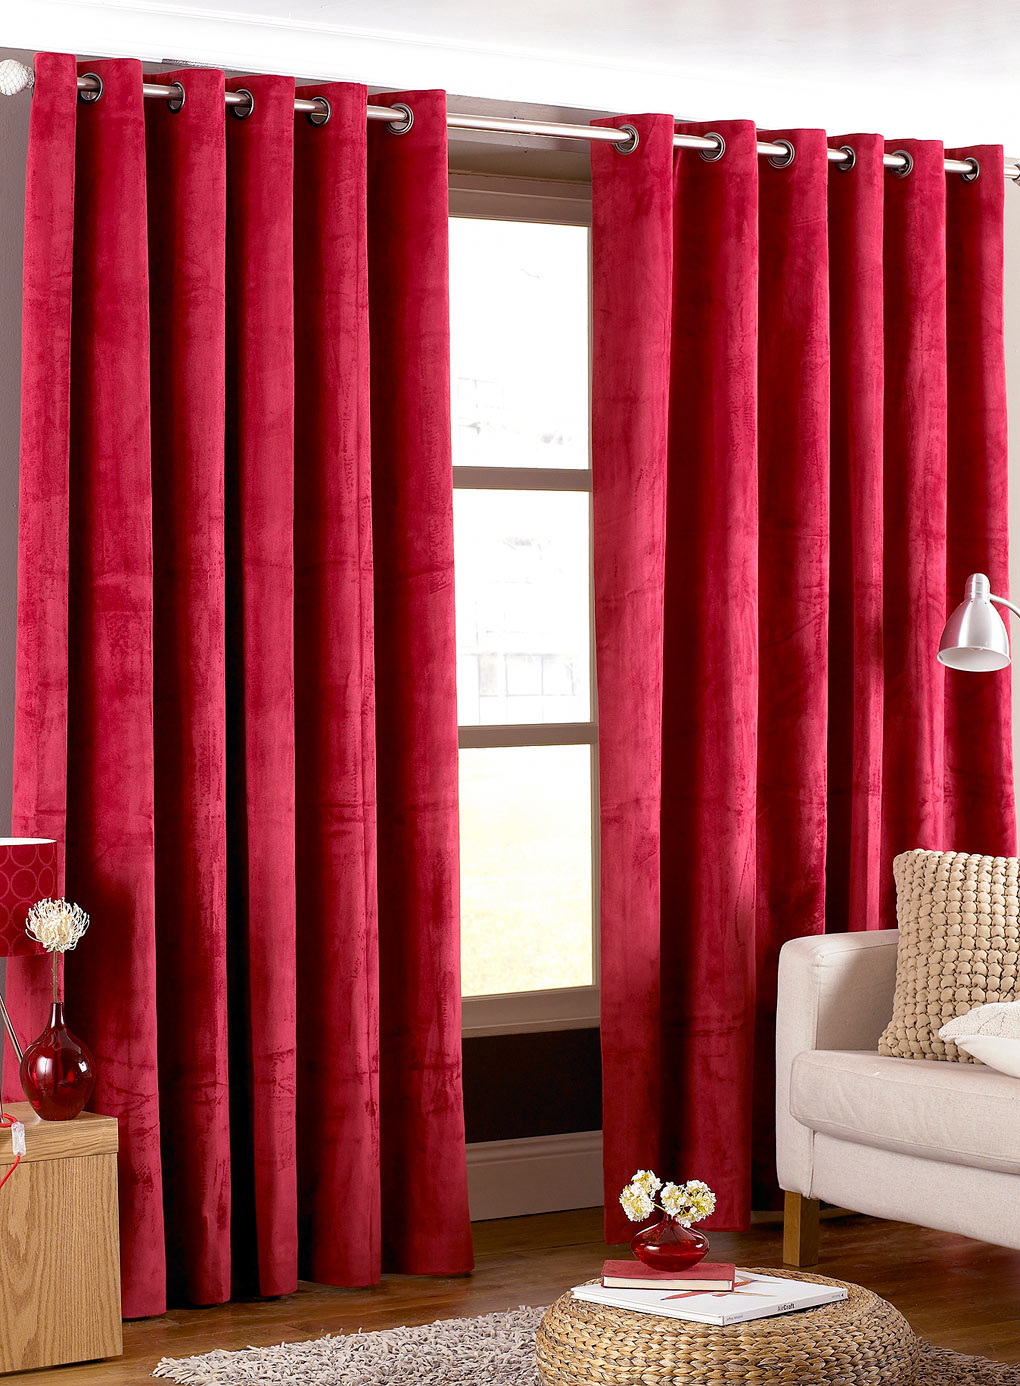 Latest red and gray striped curtains 20+ Hottest Curtain Design Ideas - 11